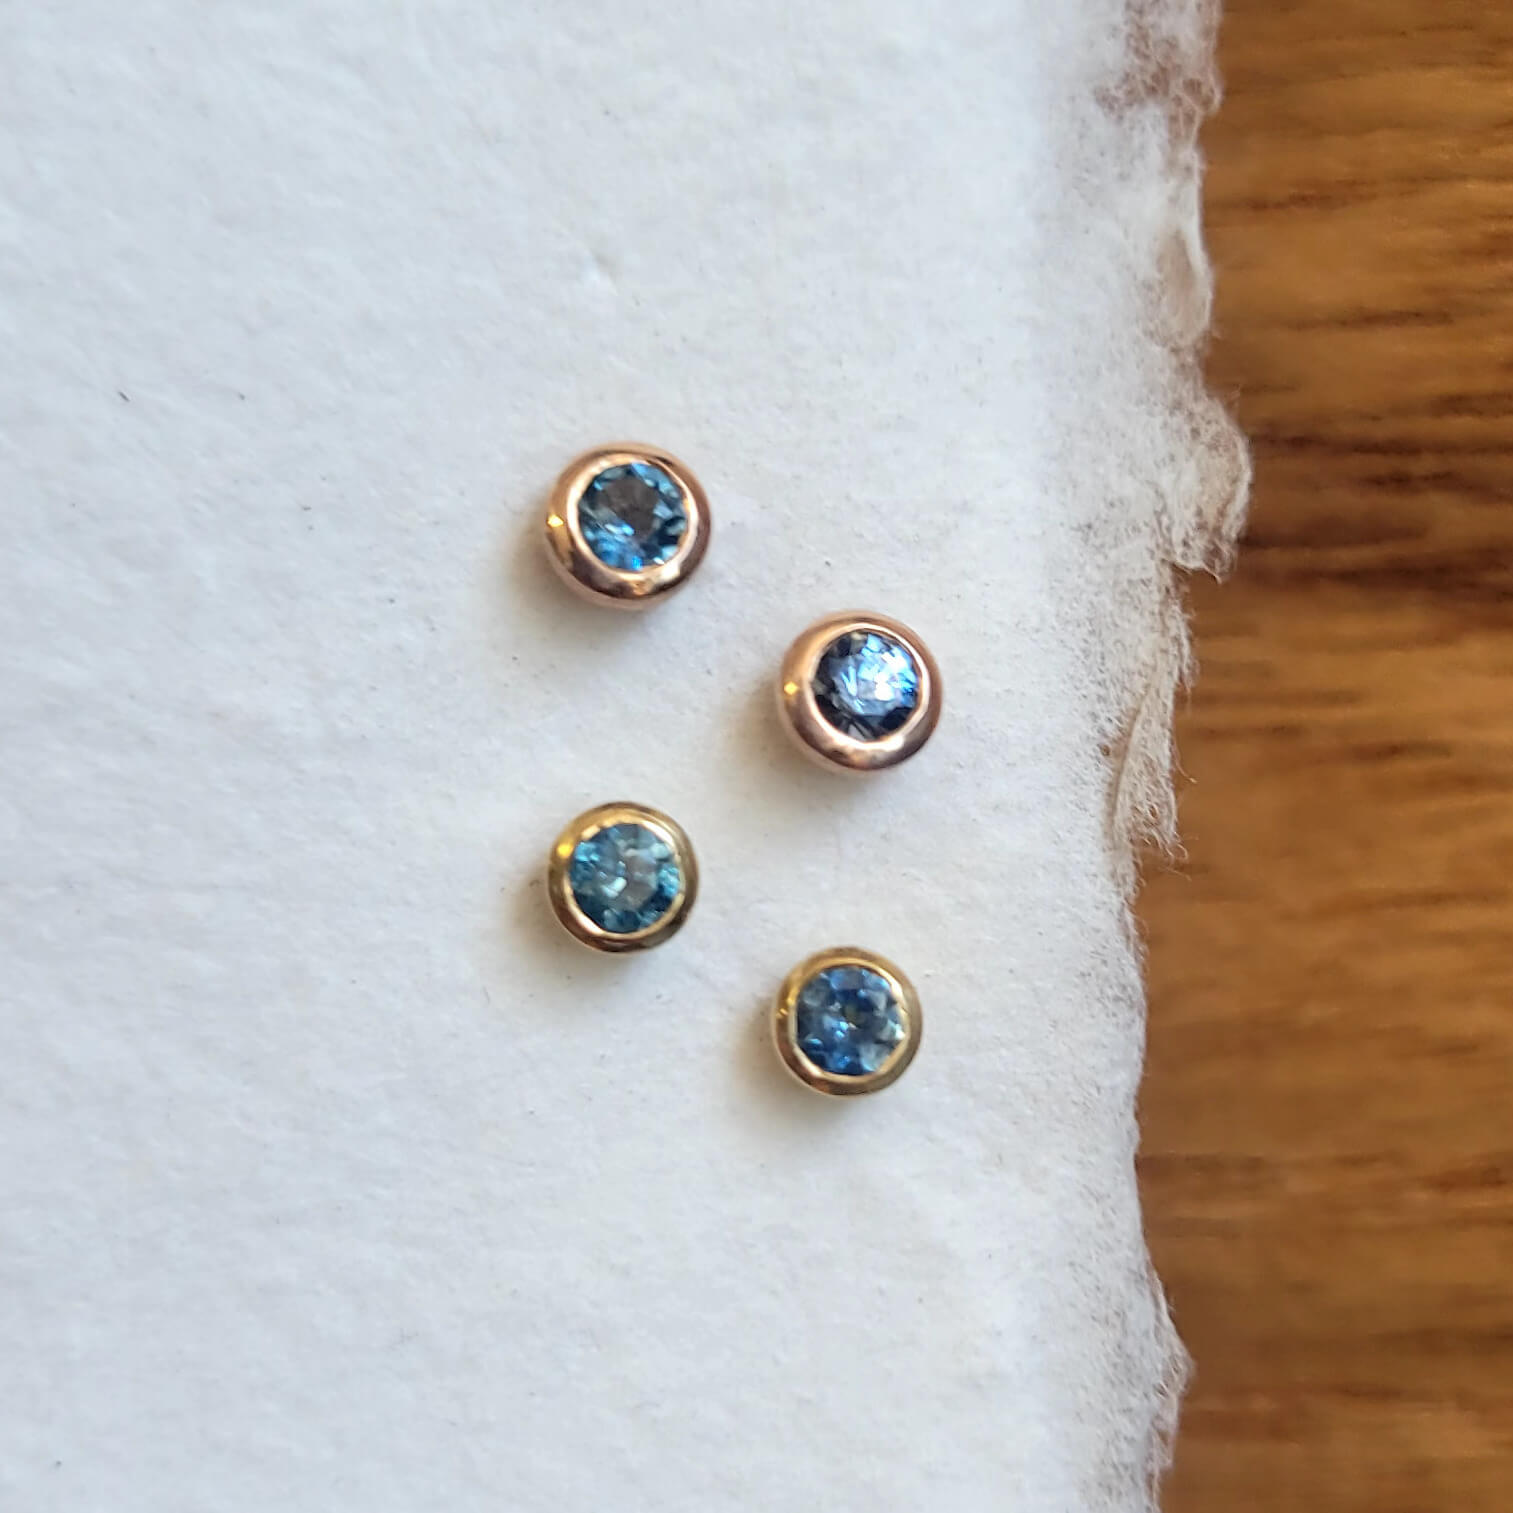 Montana sapphire stud earrings in recycled rose gold martini settings. Handmade by EC Design Jewelry in Minneapolis, MN.